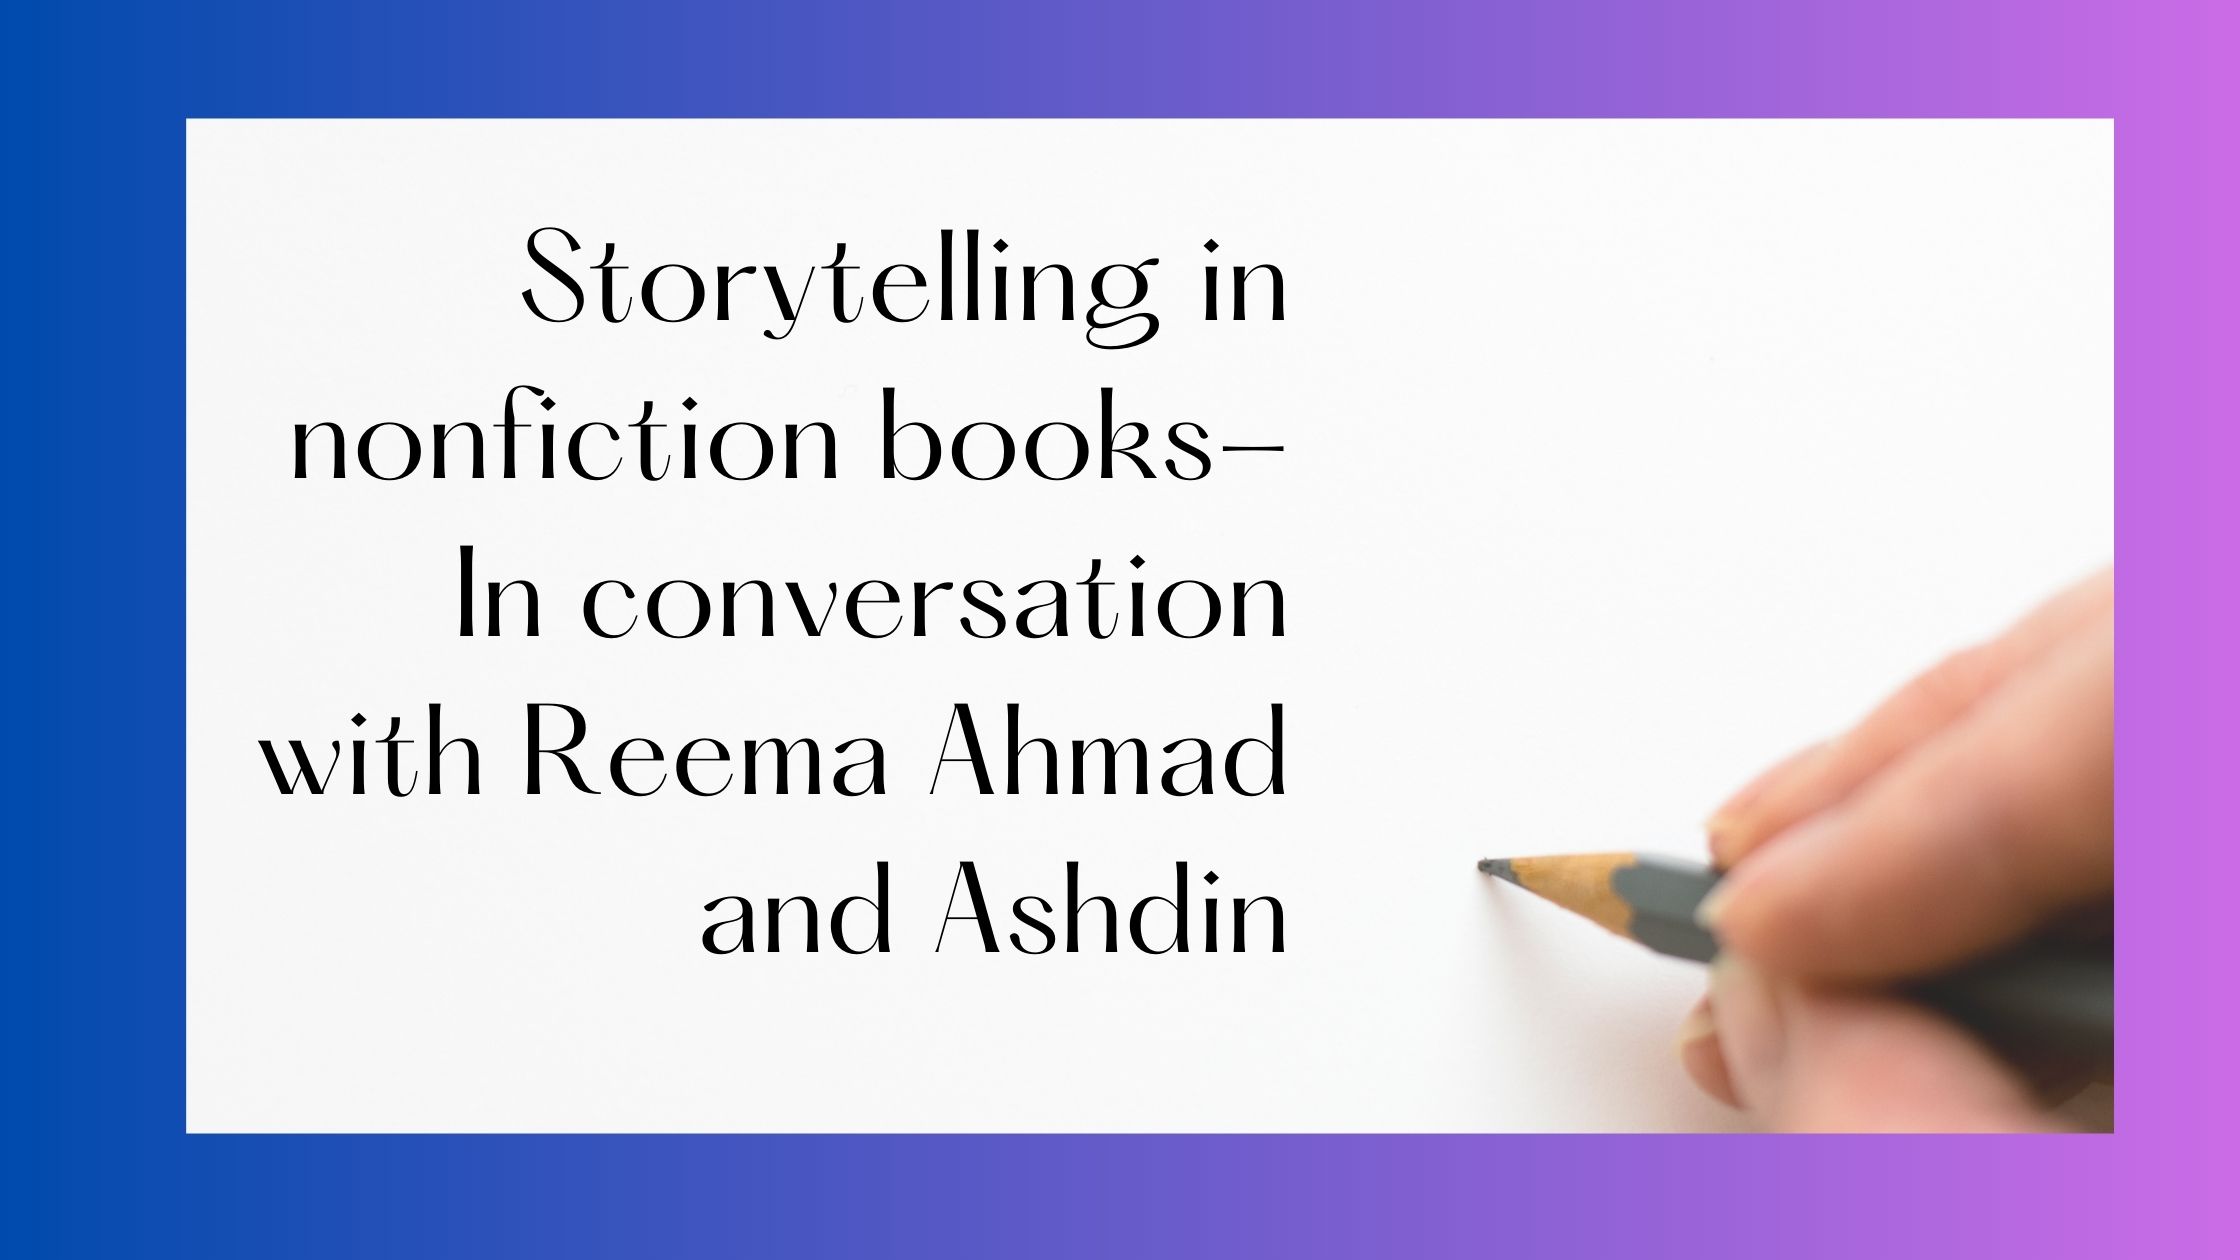 Storytelling in nonfiction books- In conversation with Reema Ahmad and Ashdin